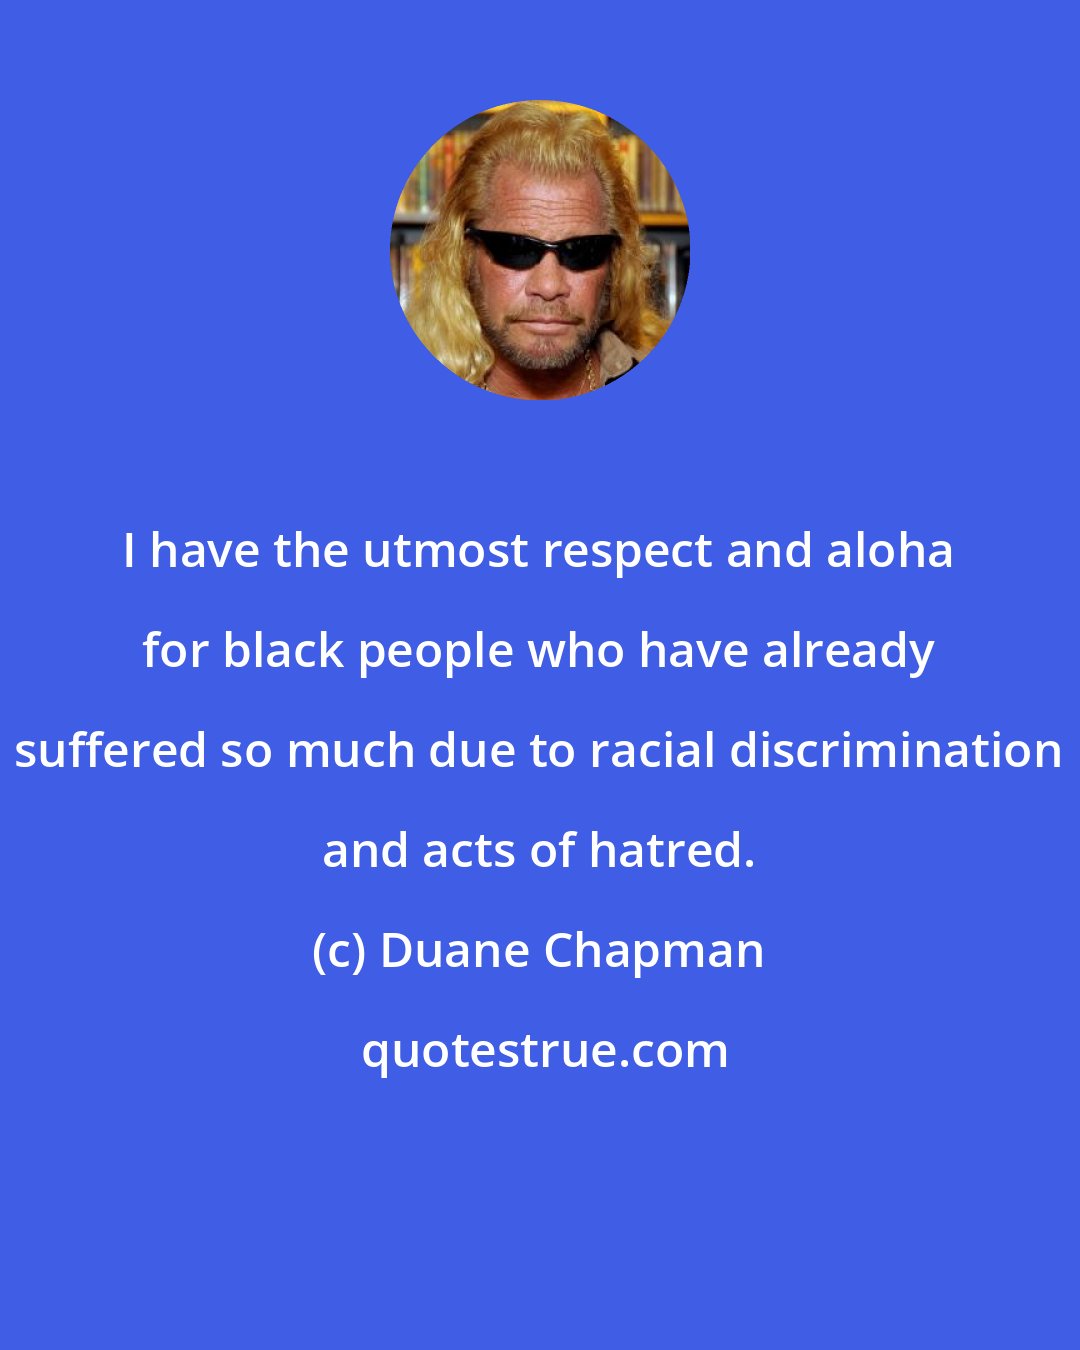 Duane Chapman: I have the utmost respect and aloha for black people who have already suffered so much due to racial discrimination and acts of hatred.